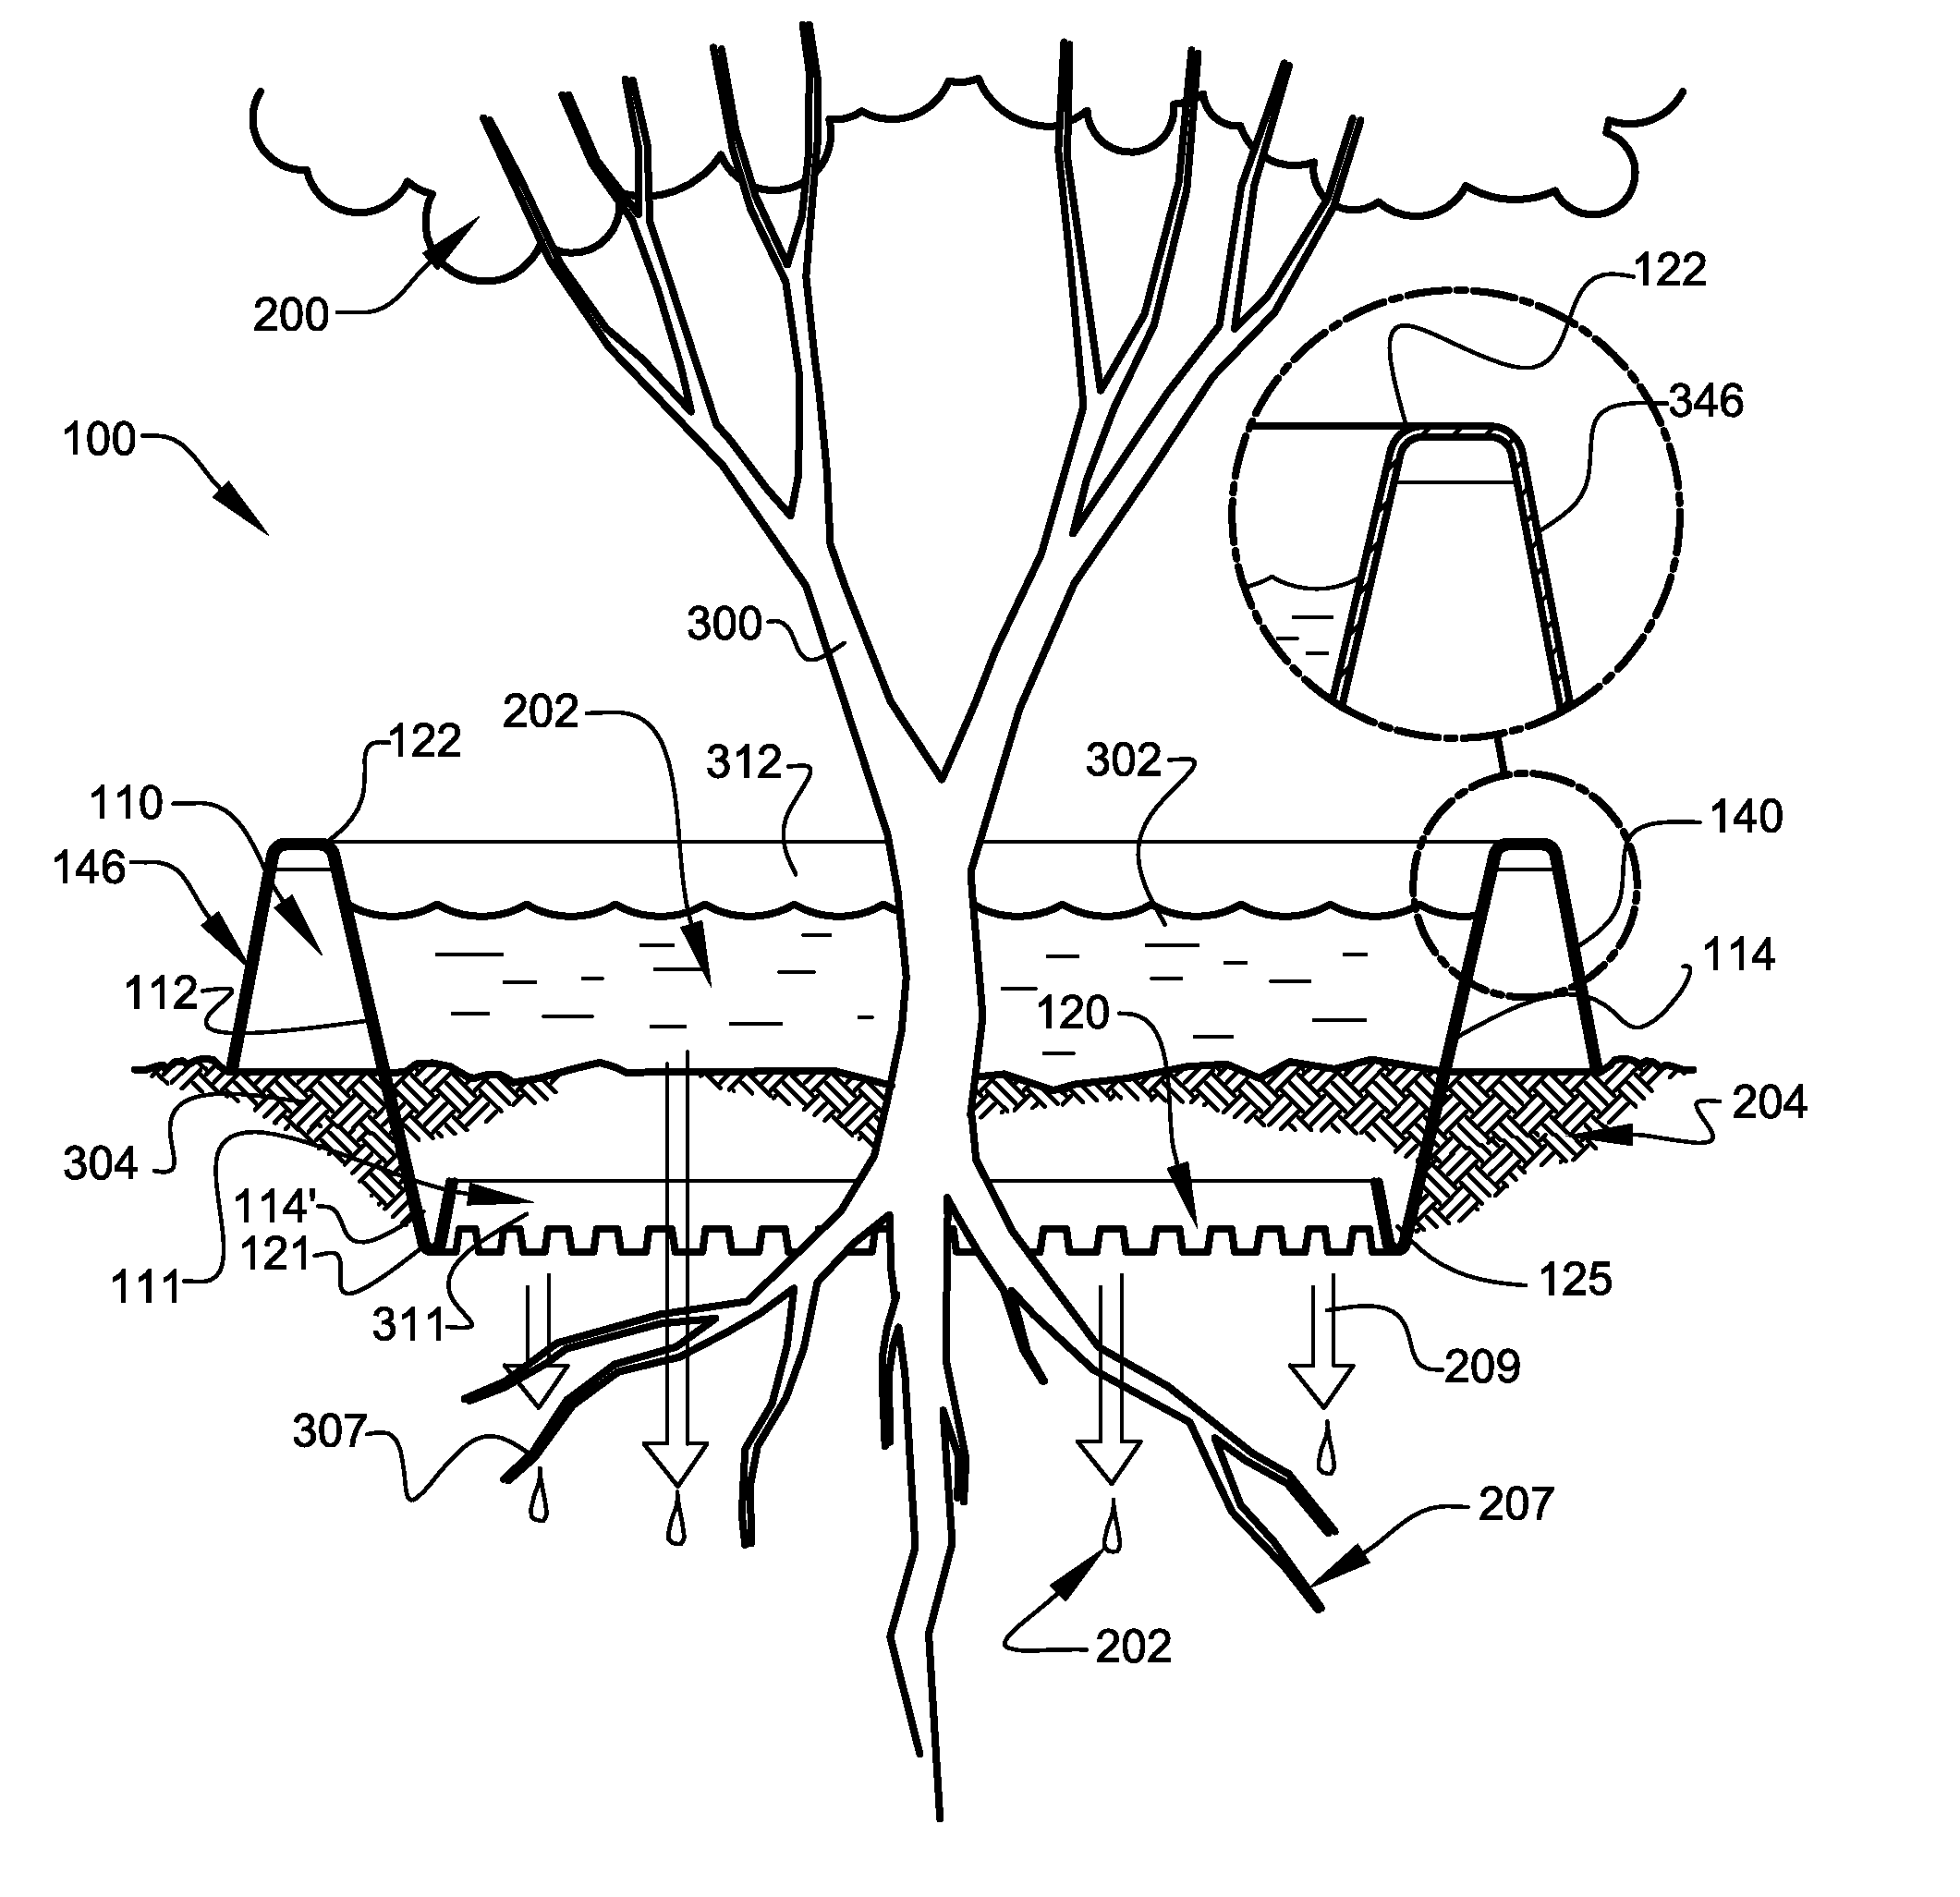 Tree and plant watering systems